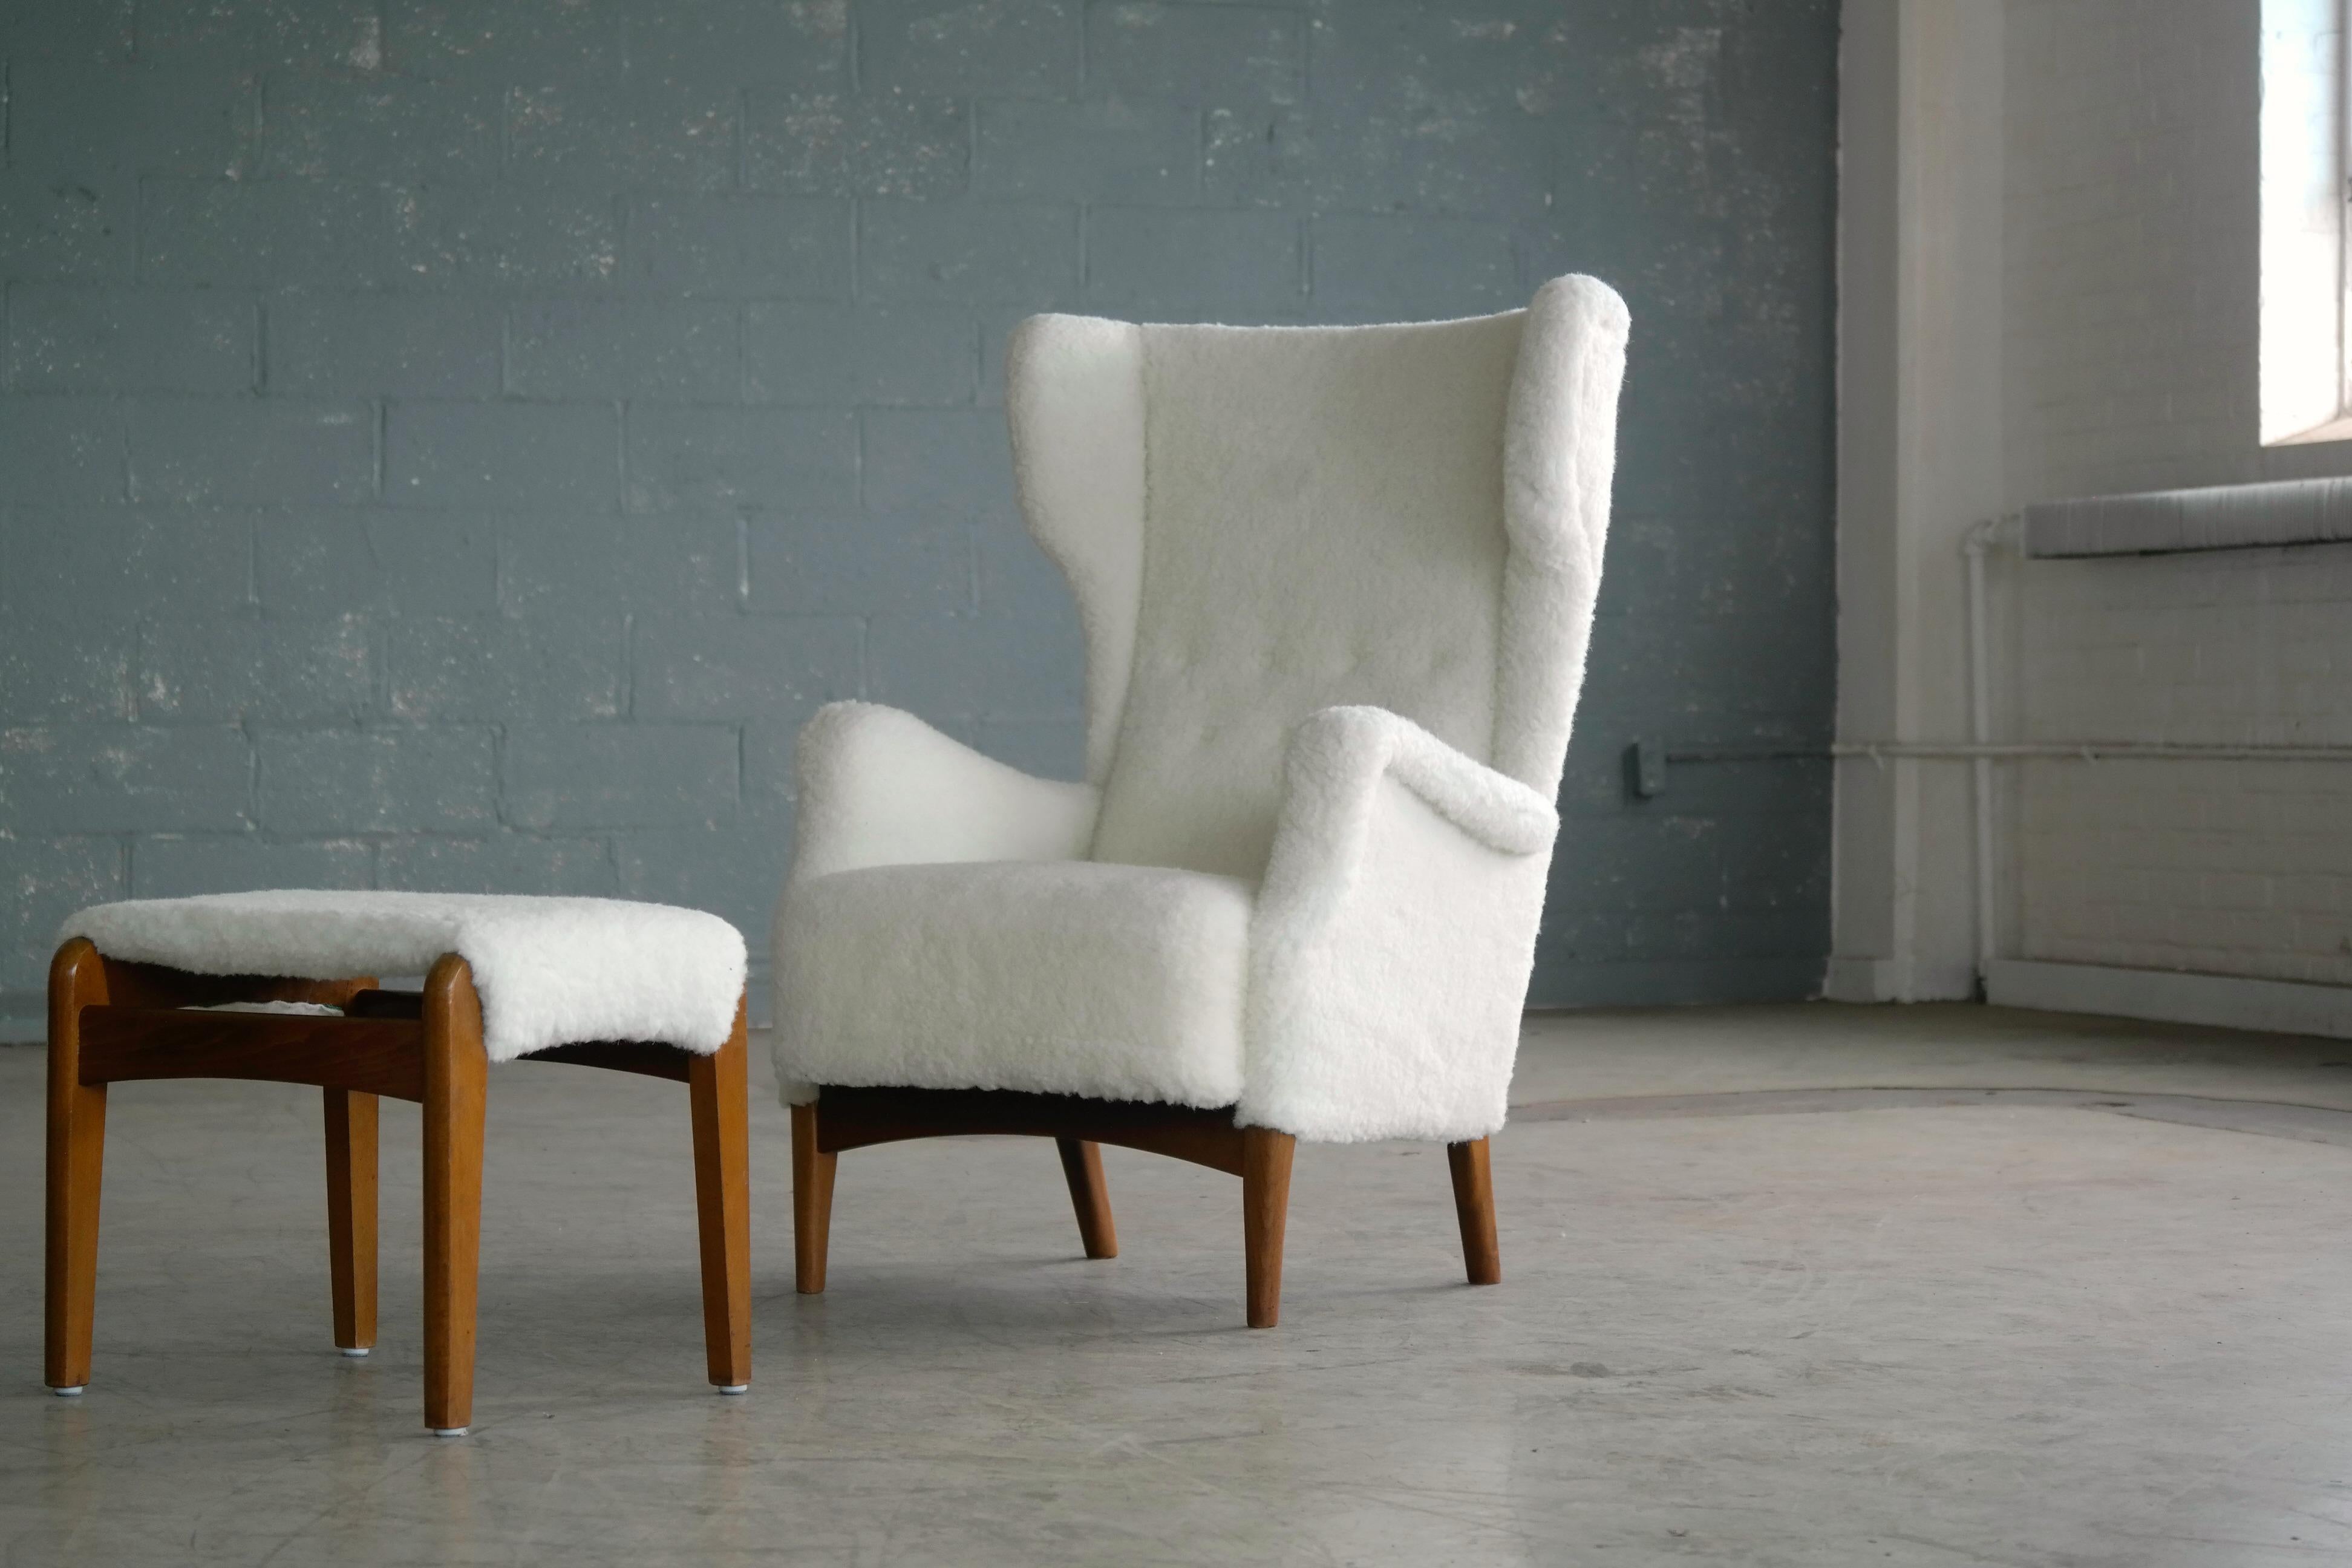 Fantastic Danish midcentury wingback chair model 8023 designed circa 1951 and first seen in Fritz Hansen's 1951 catalog. The matching ottoman is a model 1164 by Fritz Hansen and both pieces were made at Fritz Hansen factory in Denmark in the early